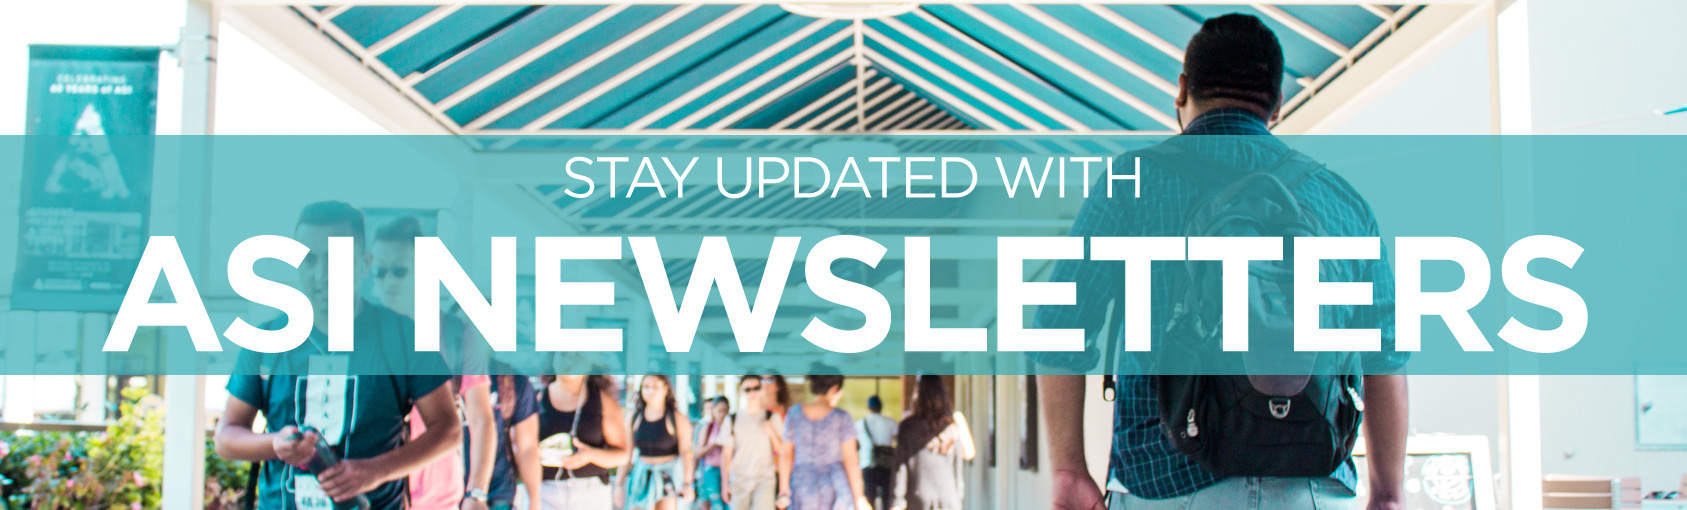 Stay Updated With ASI Newsletters banner